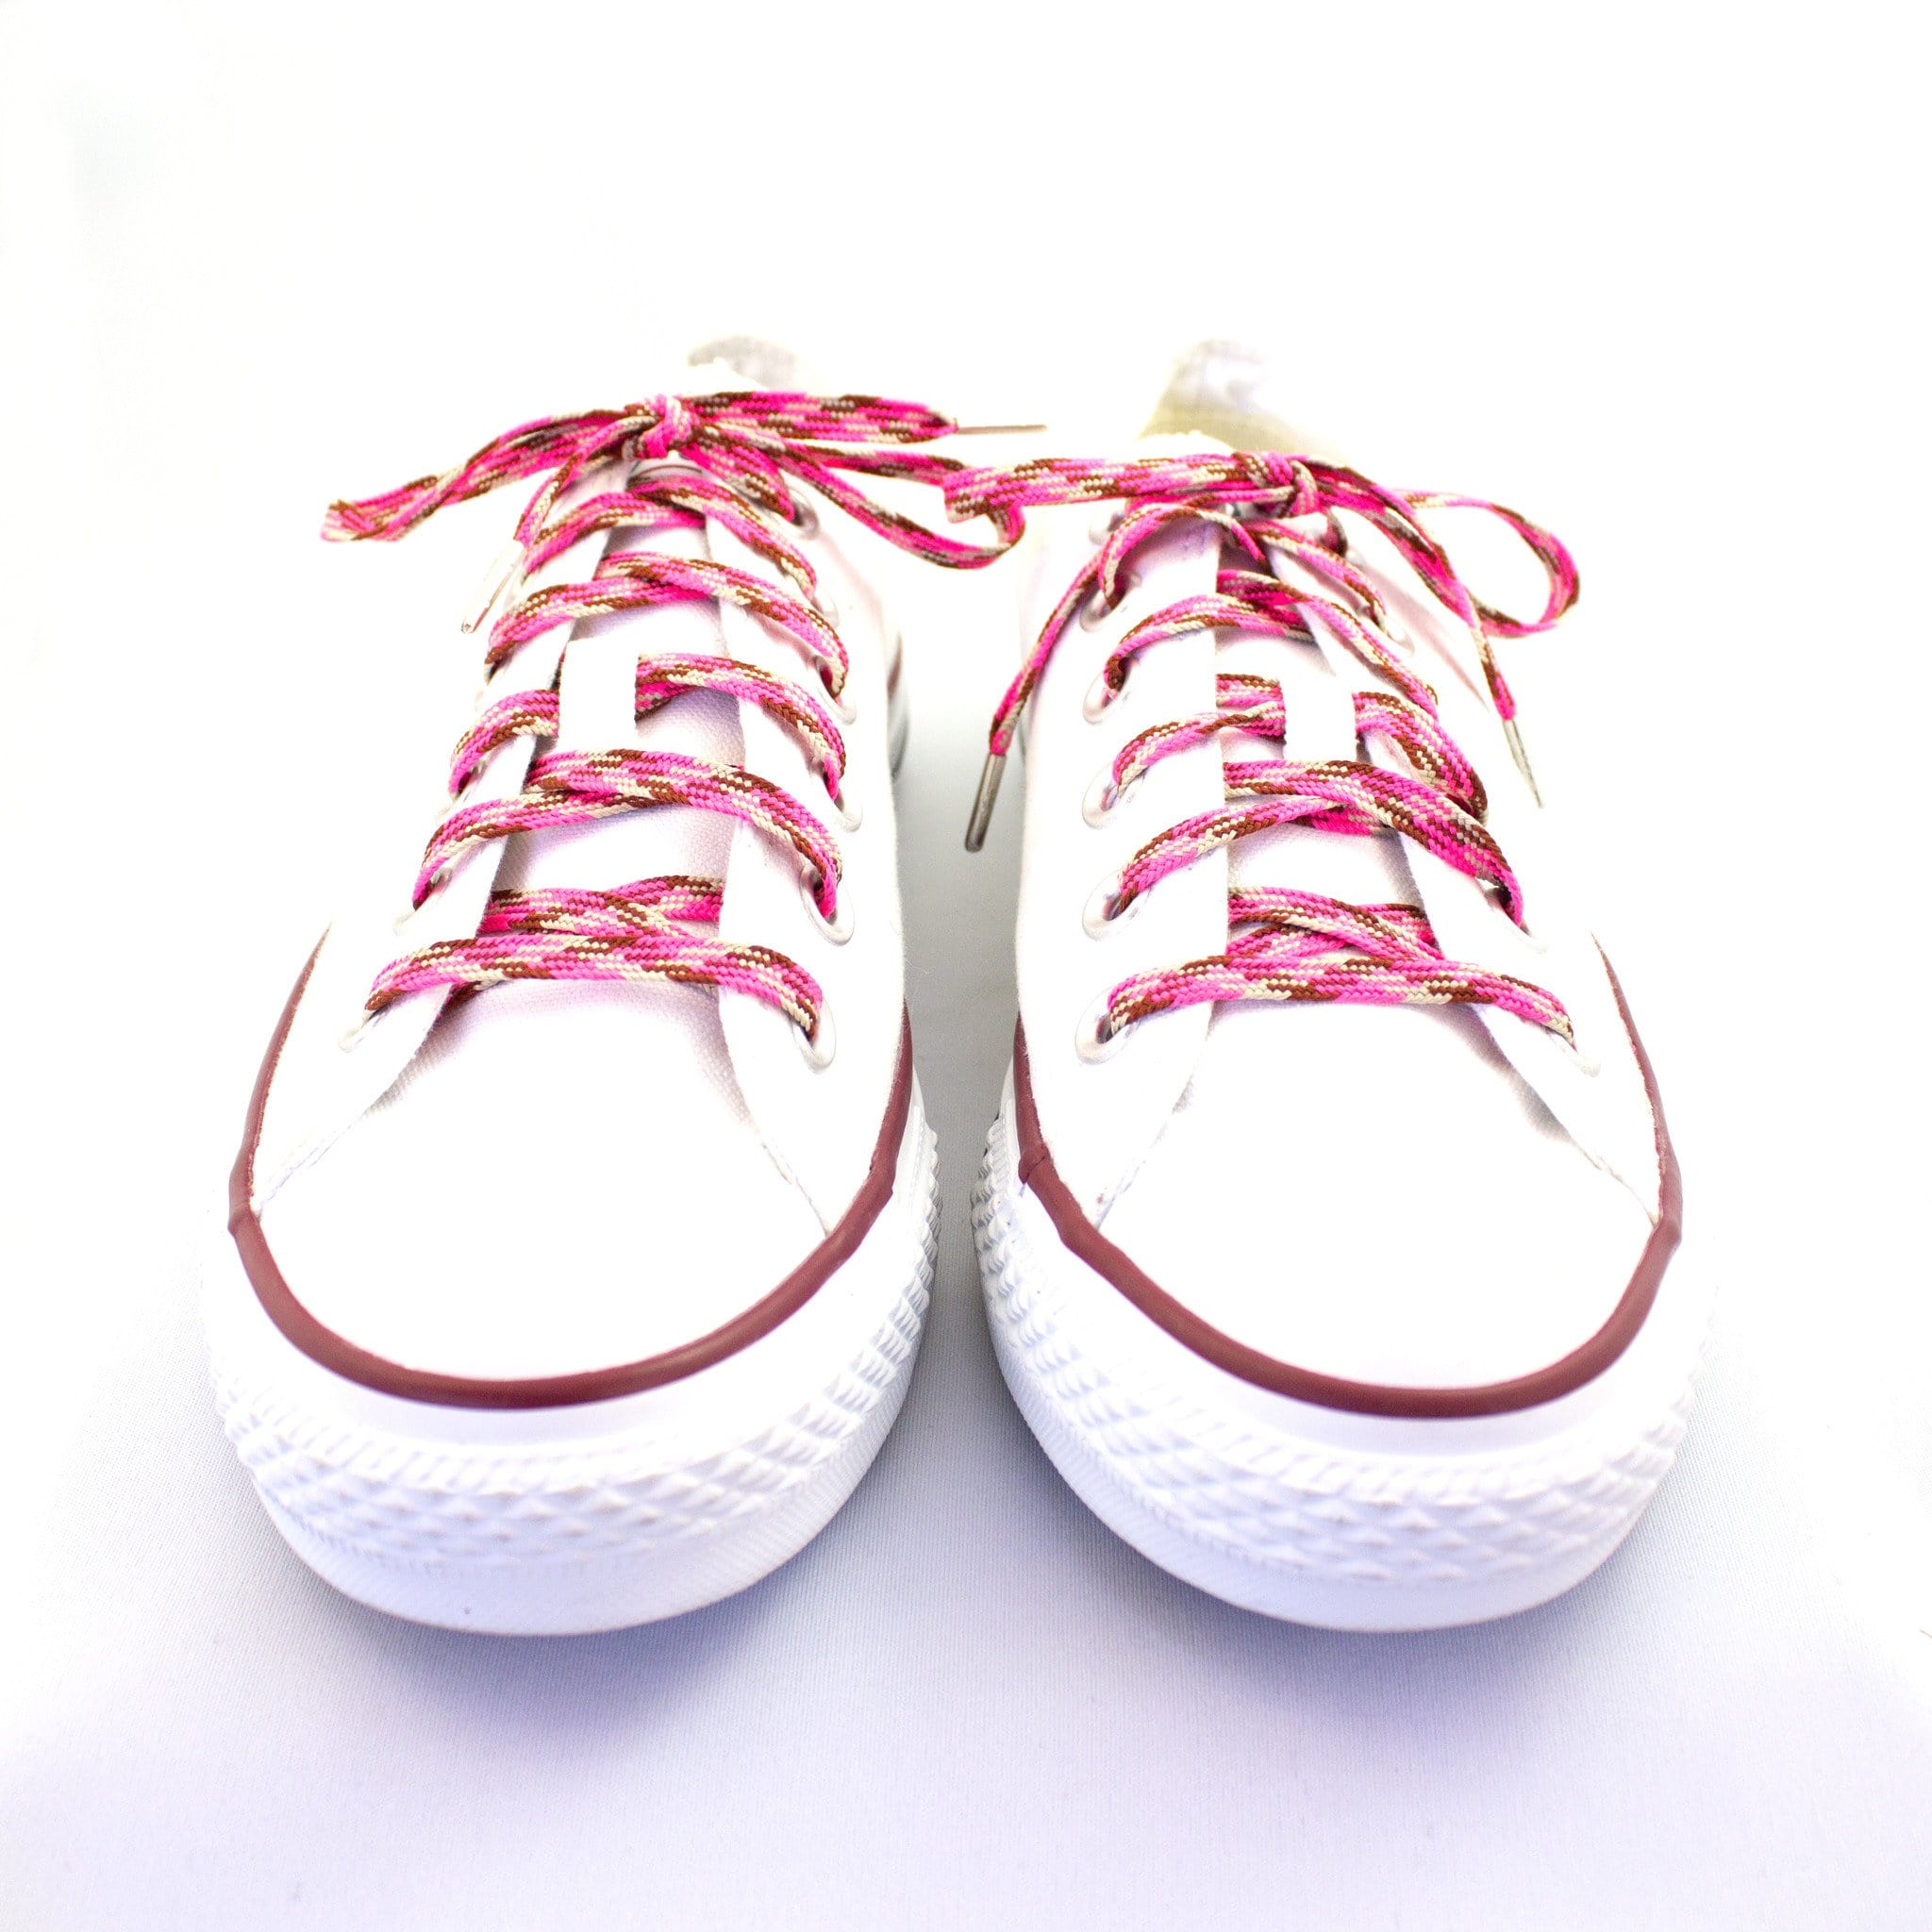 white shoes pink laces